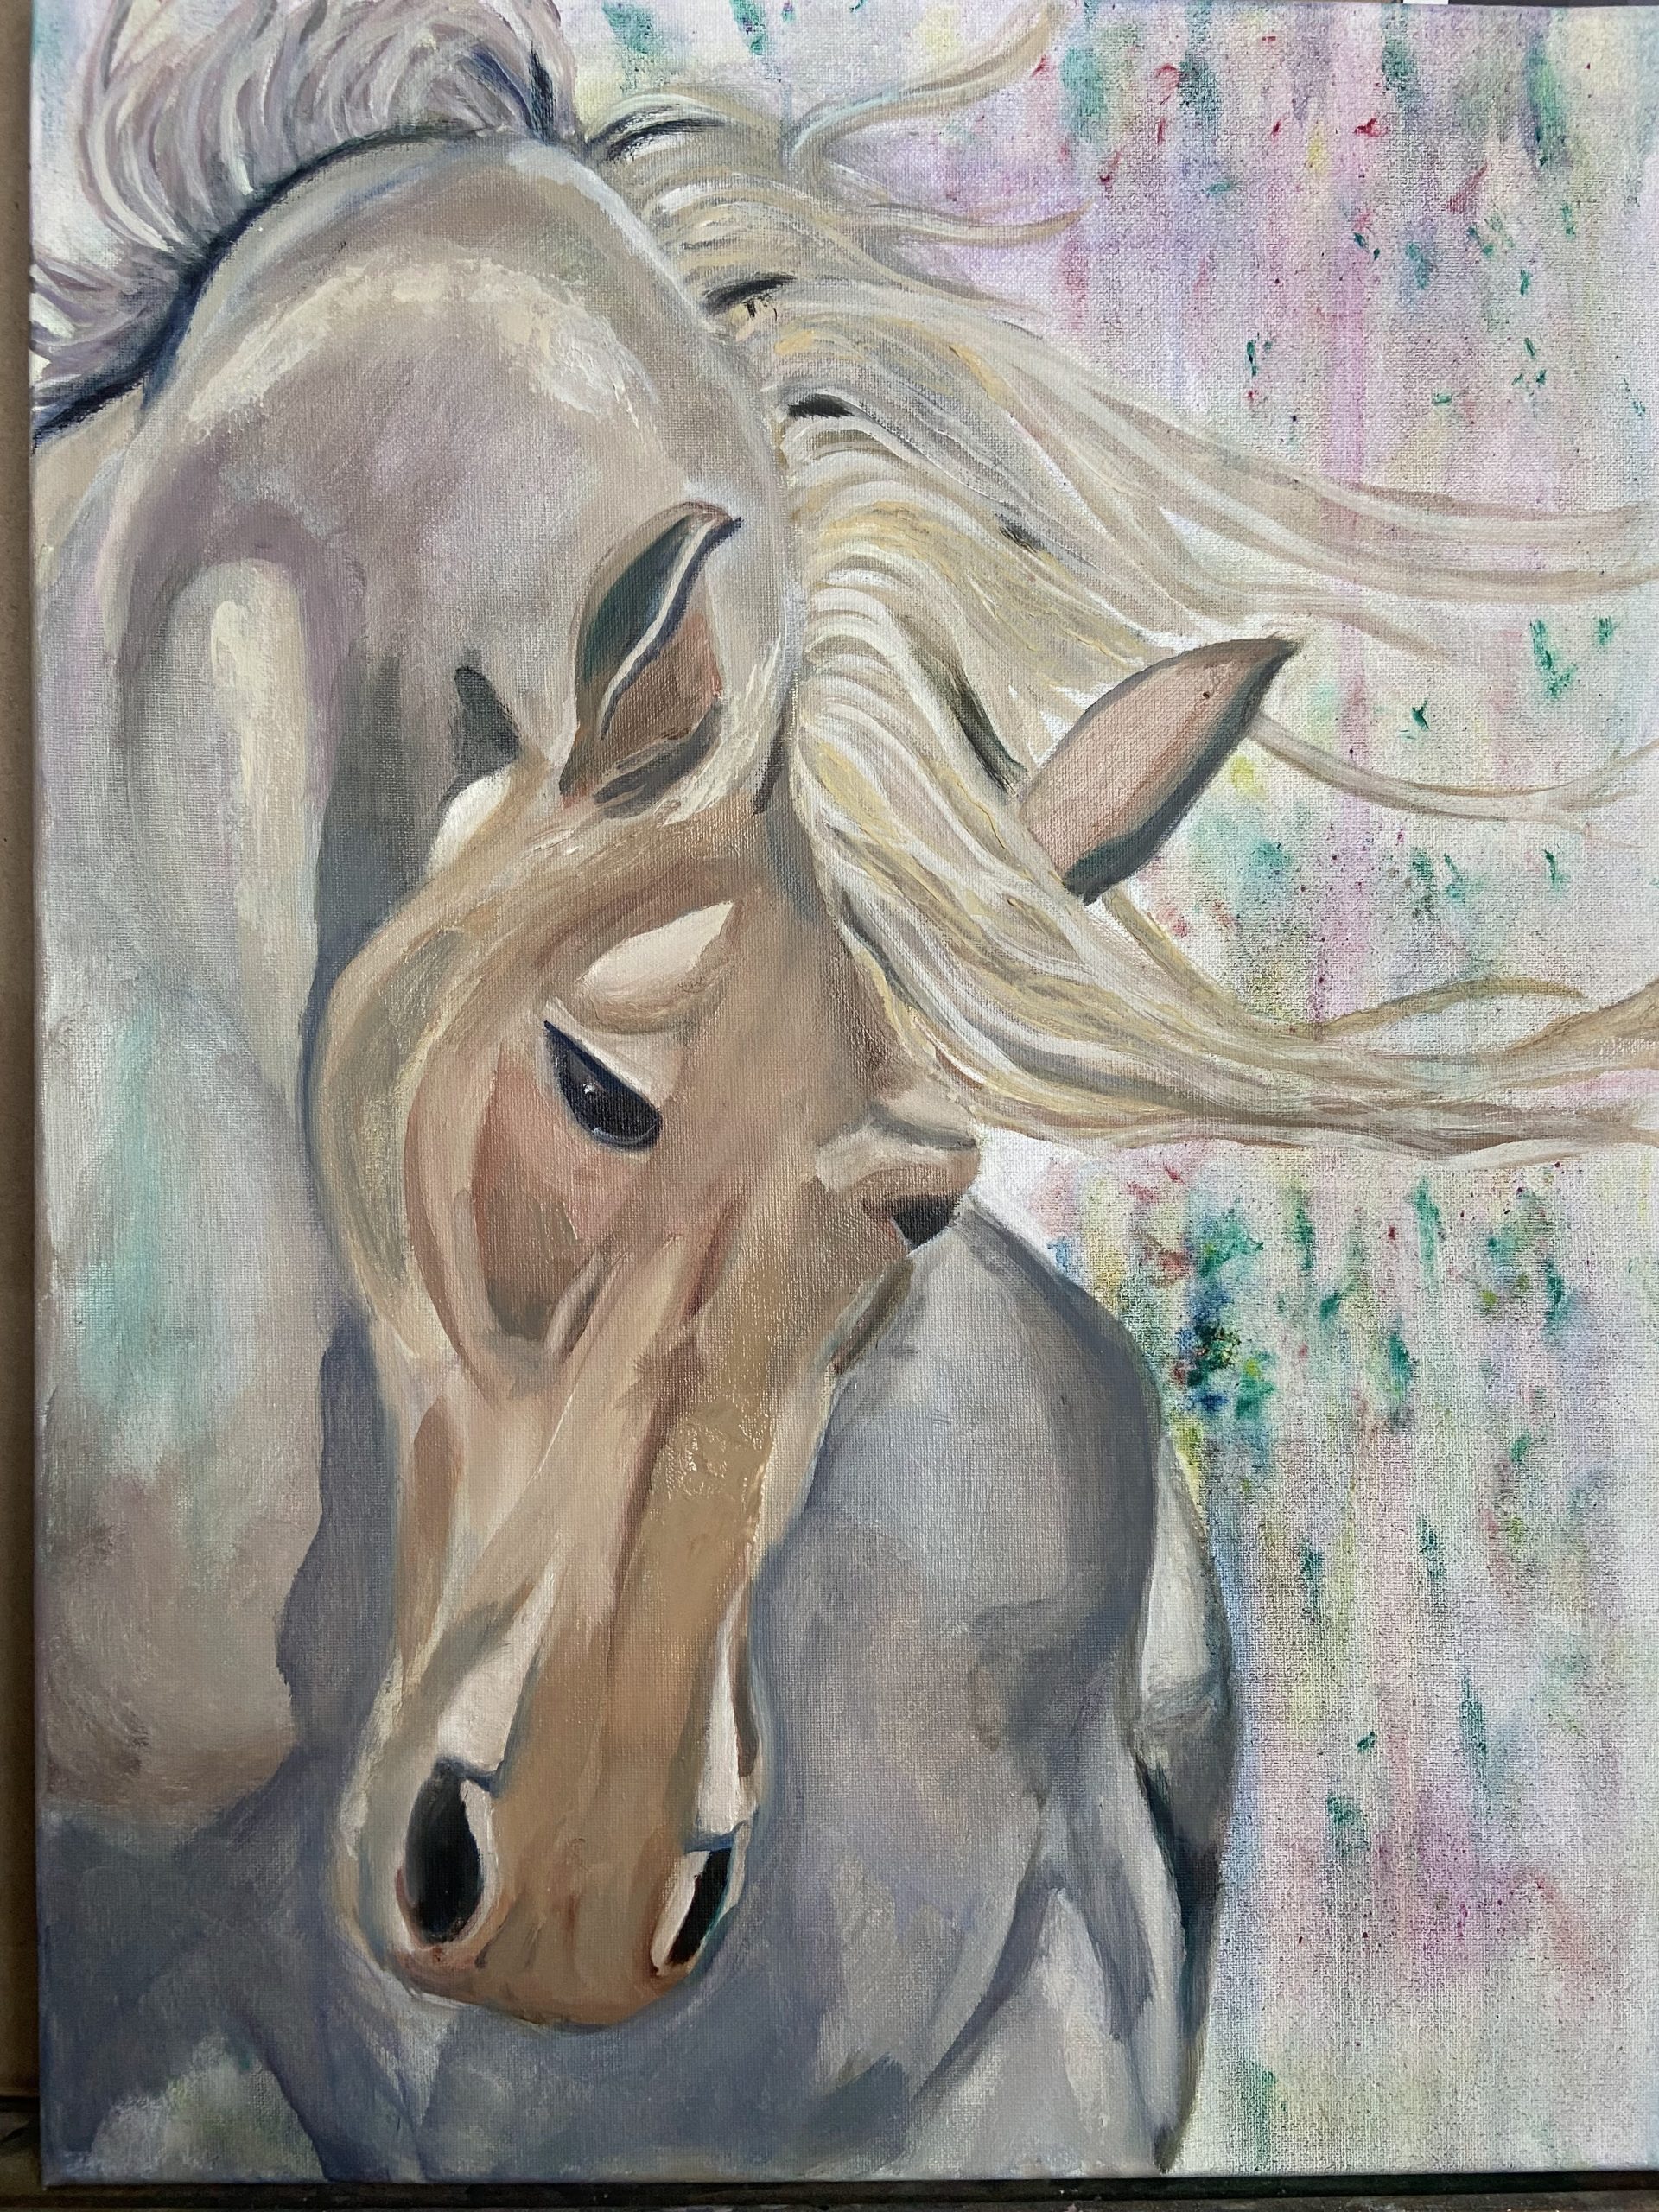 Painting of a horse done portrait-style with repaired canvas holes.